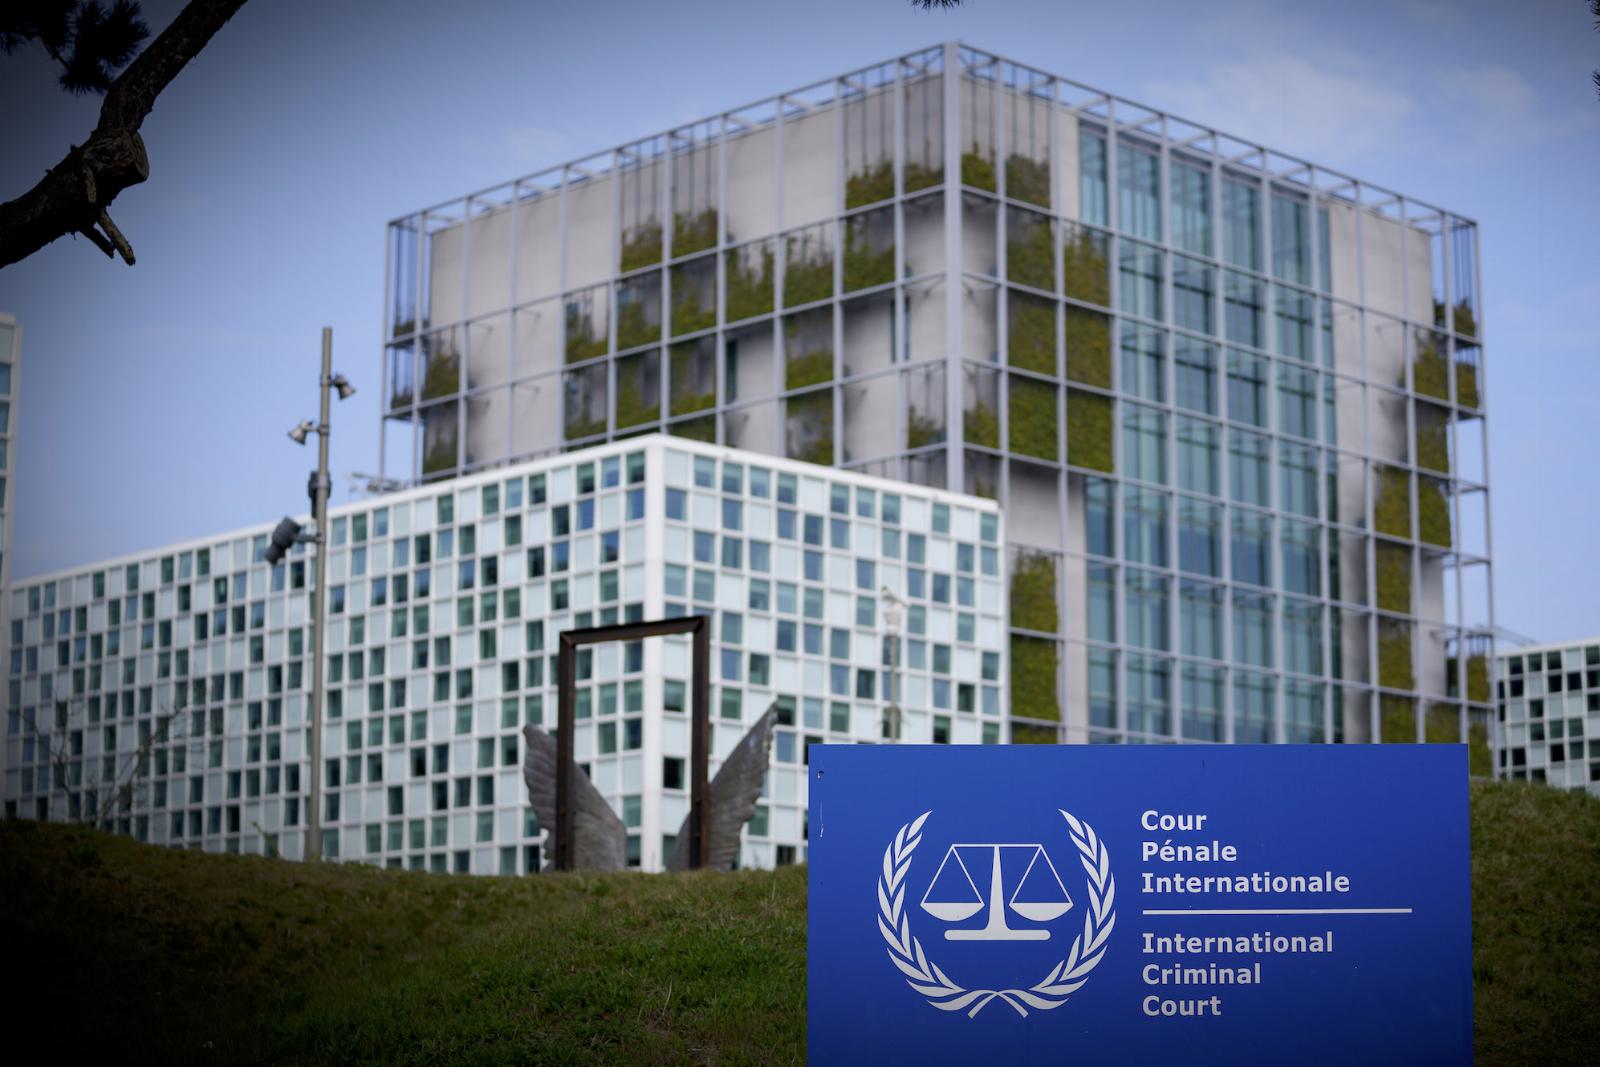 International Criminal Court says hackers accessed its systems